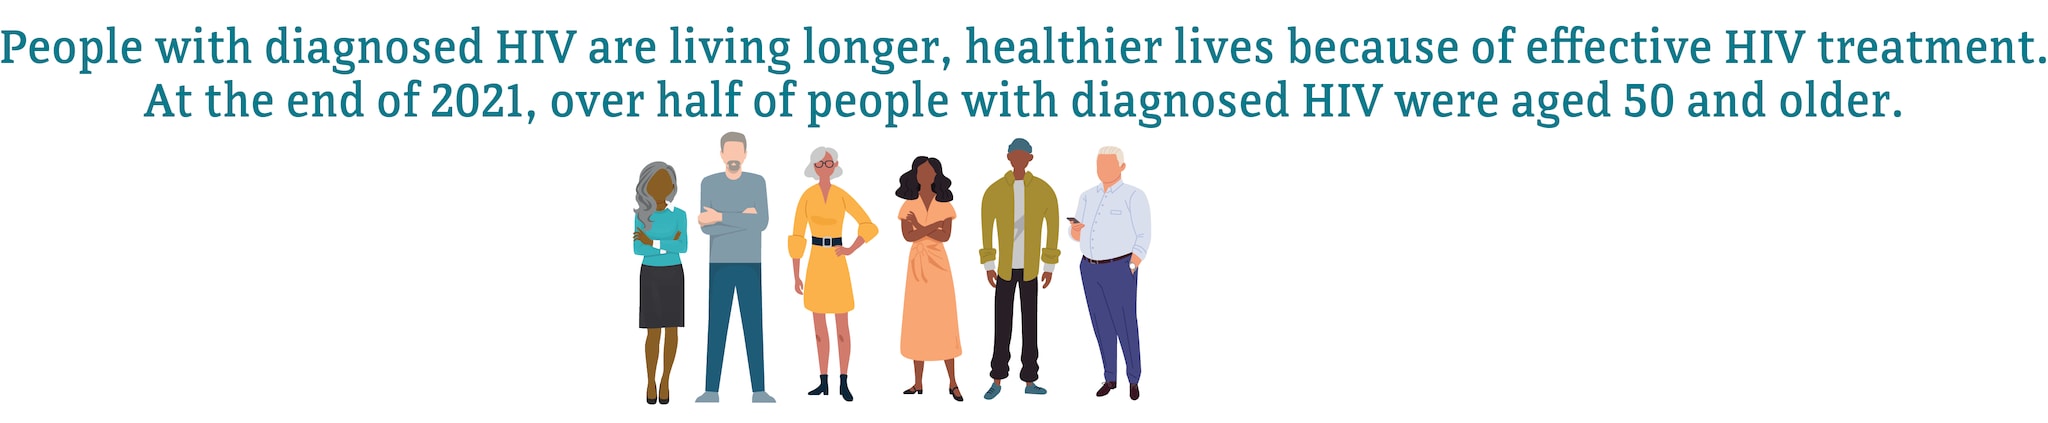 People with diagnosed HIV are living longer, healthier lives because of effective HIV treatment. At the end of 2020, over half of people with diagnosed HIV were aged 50 and older.